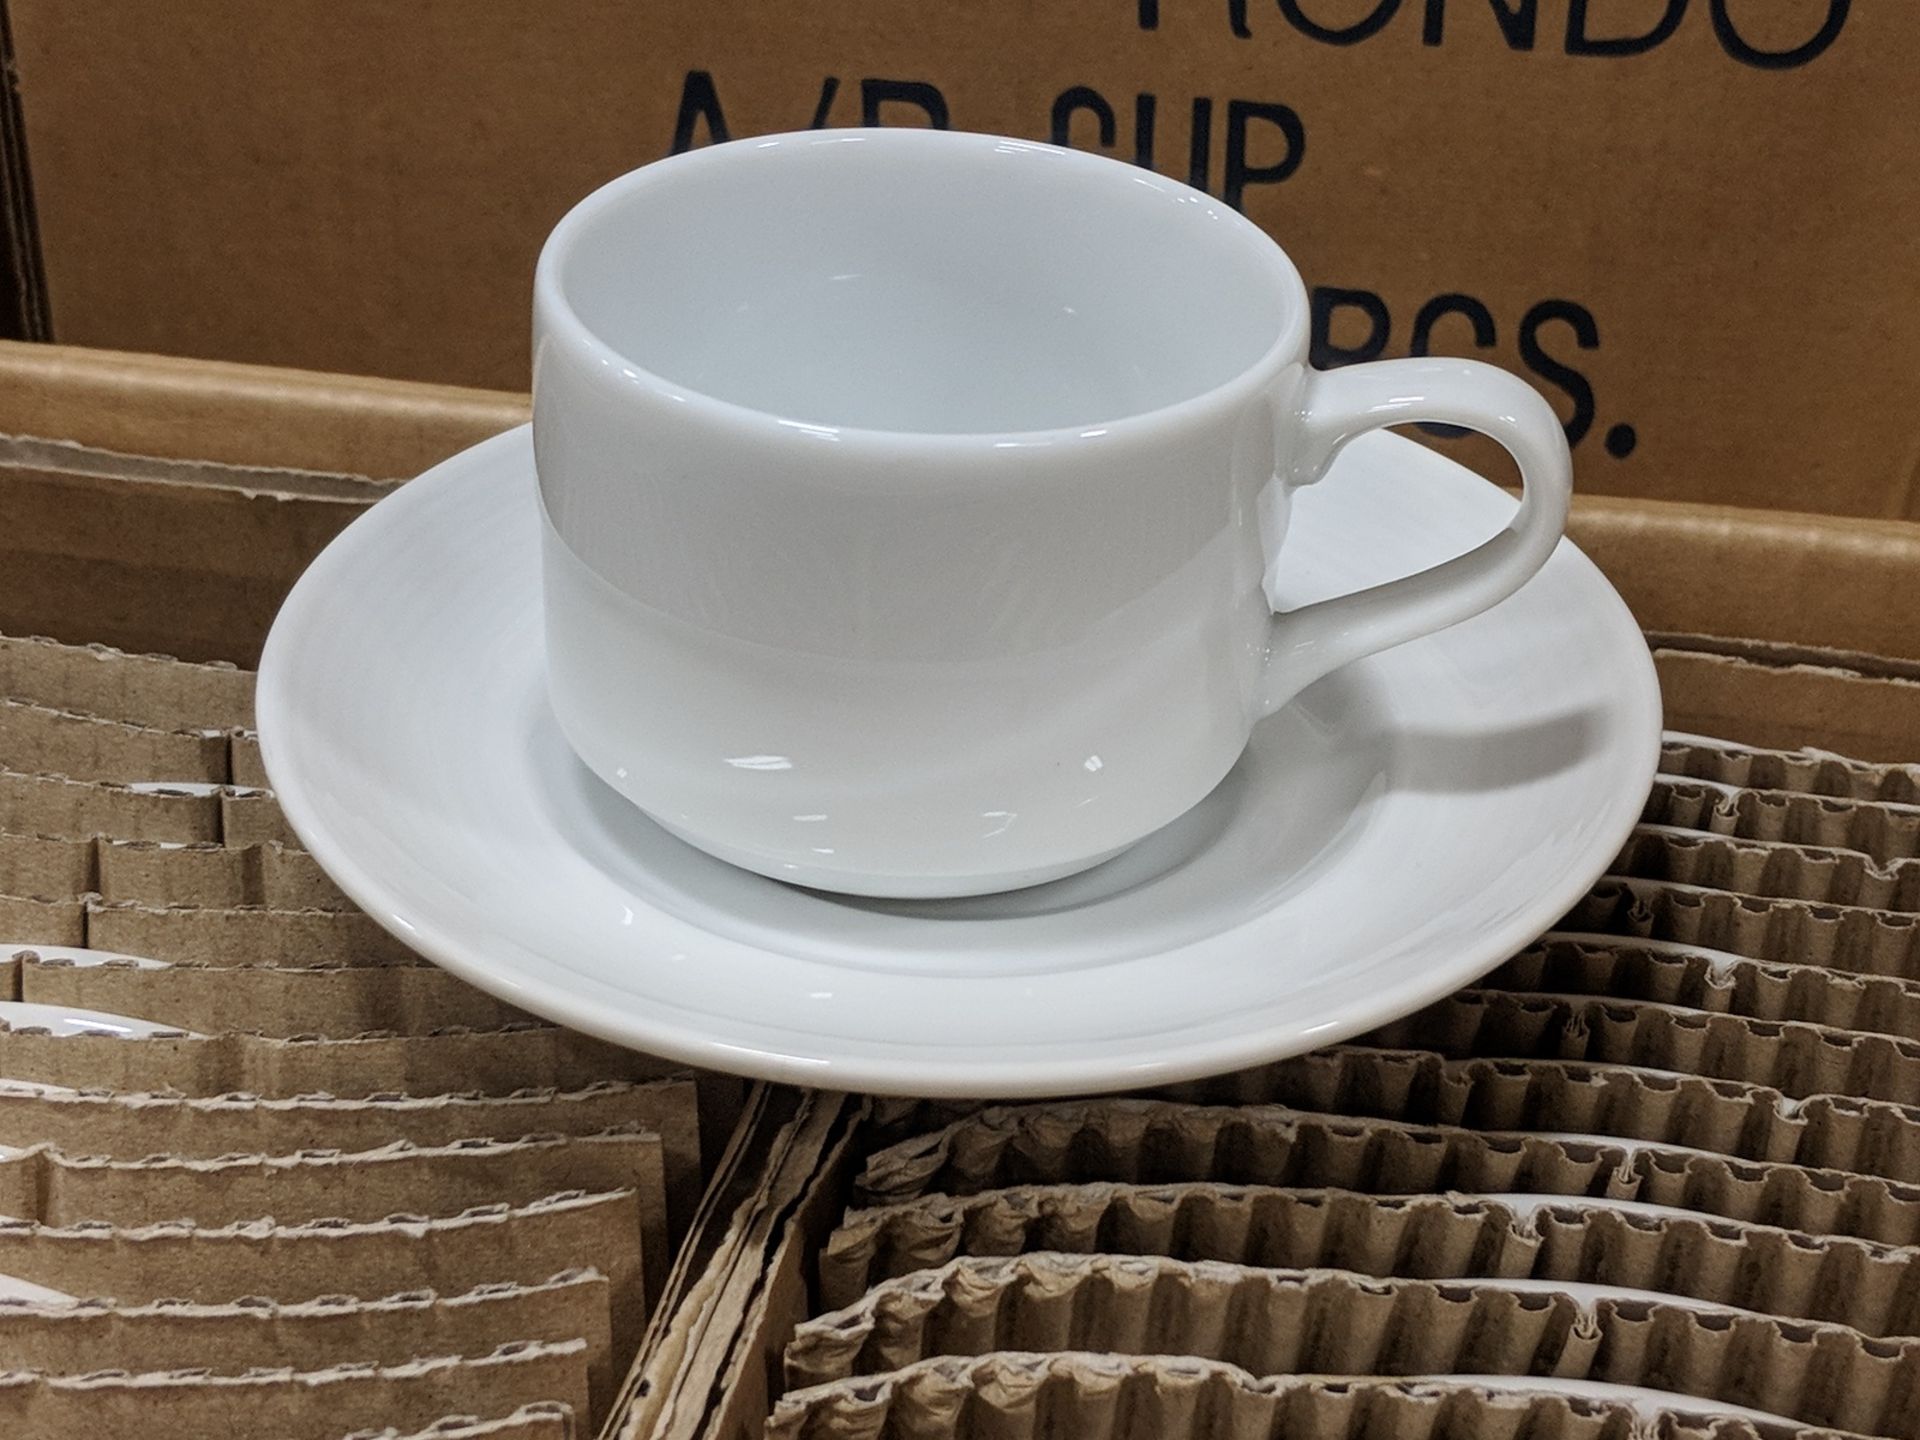 4oz/120ml White Porcelain Cups, Arcoroc "Rondo" S1526 - Lot of 12 - Image 3 of 4